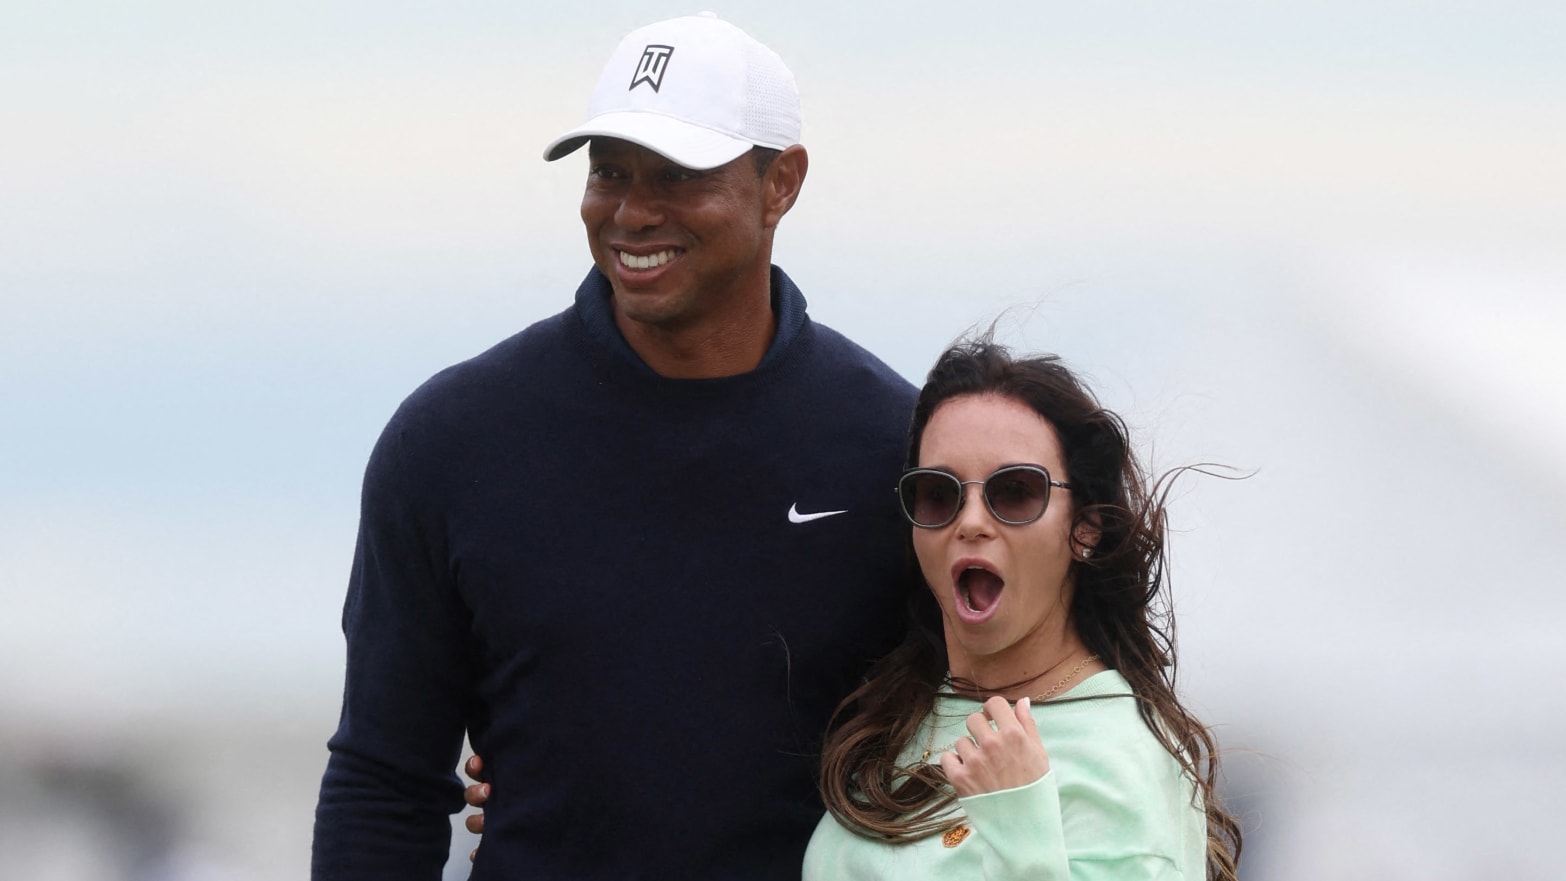 candice coombs recommends Tiger Woods Penis Pic